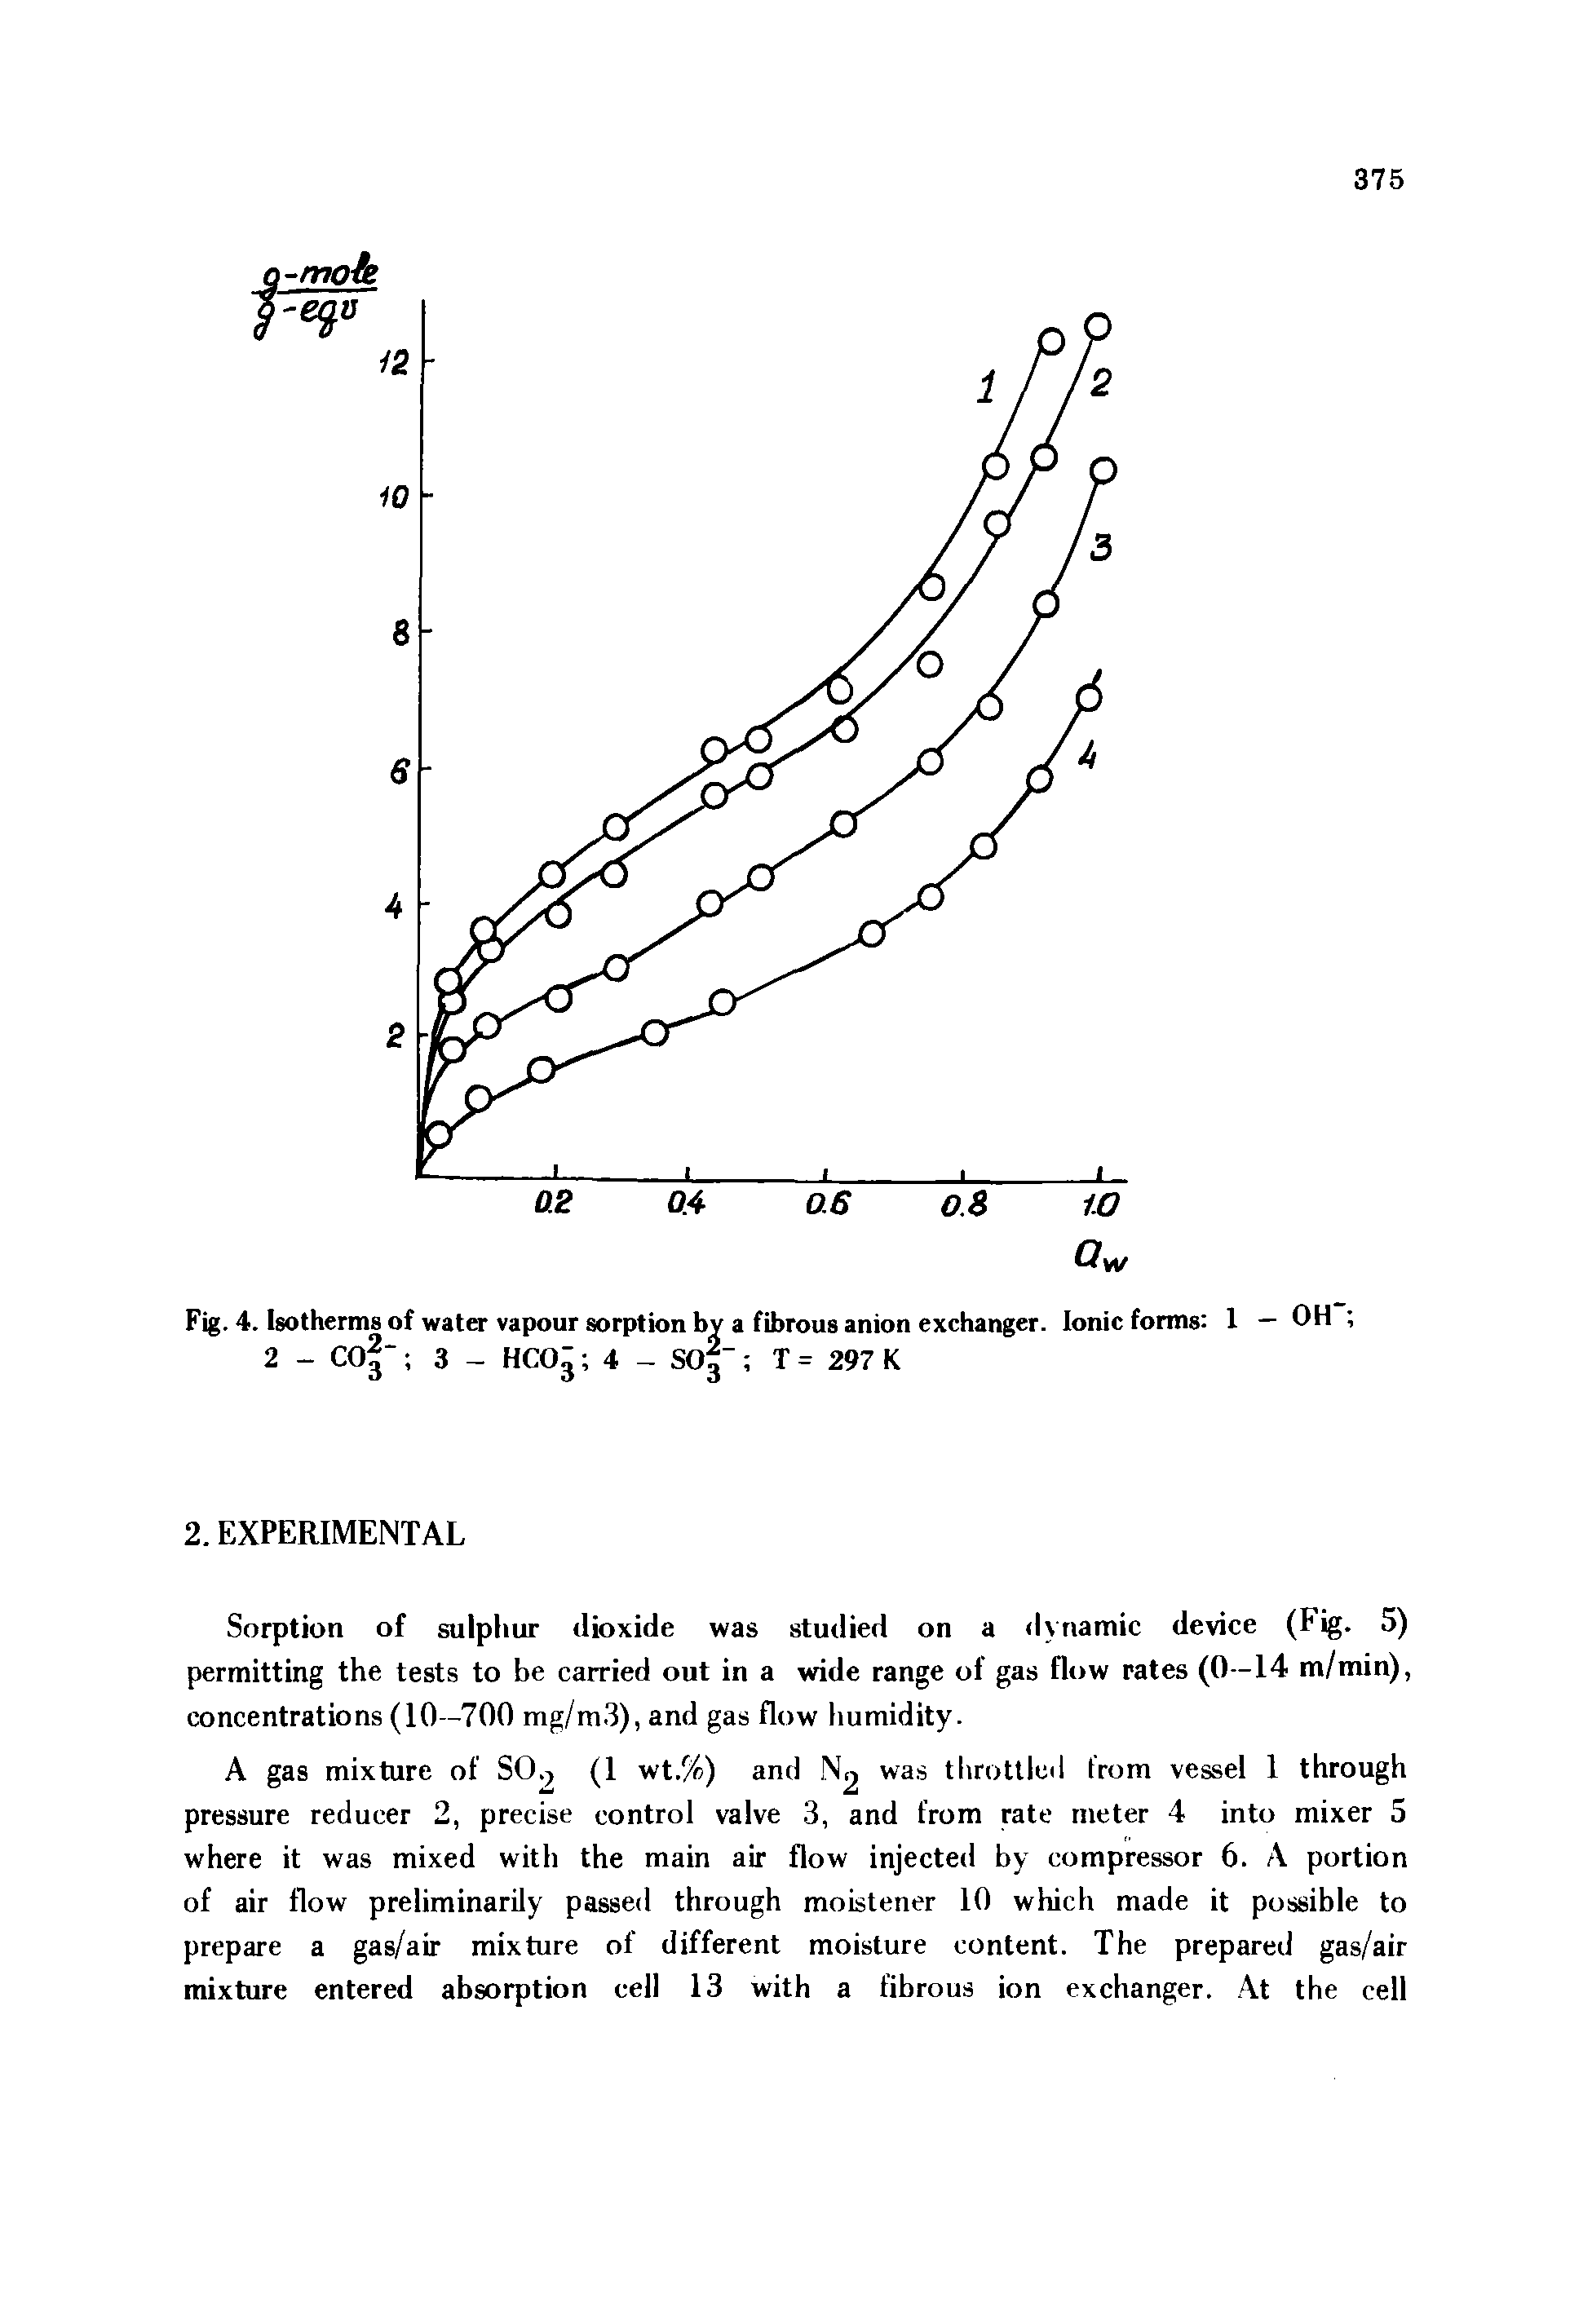 Fig. 4. Isotherms of water vapour sorption a fibrous anion exchanger. Ionic forms 1 — OH...